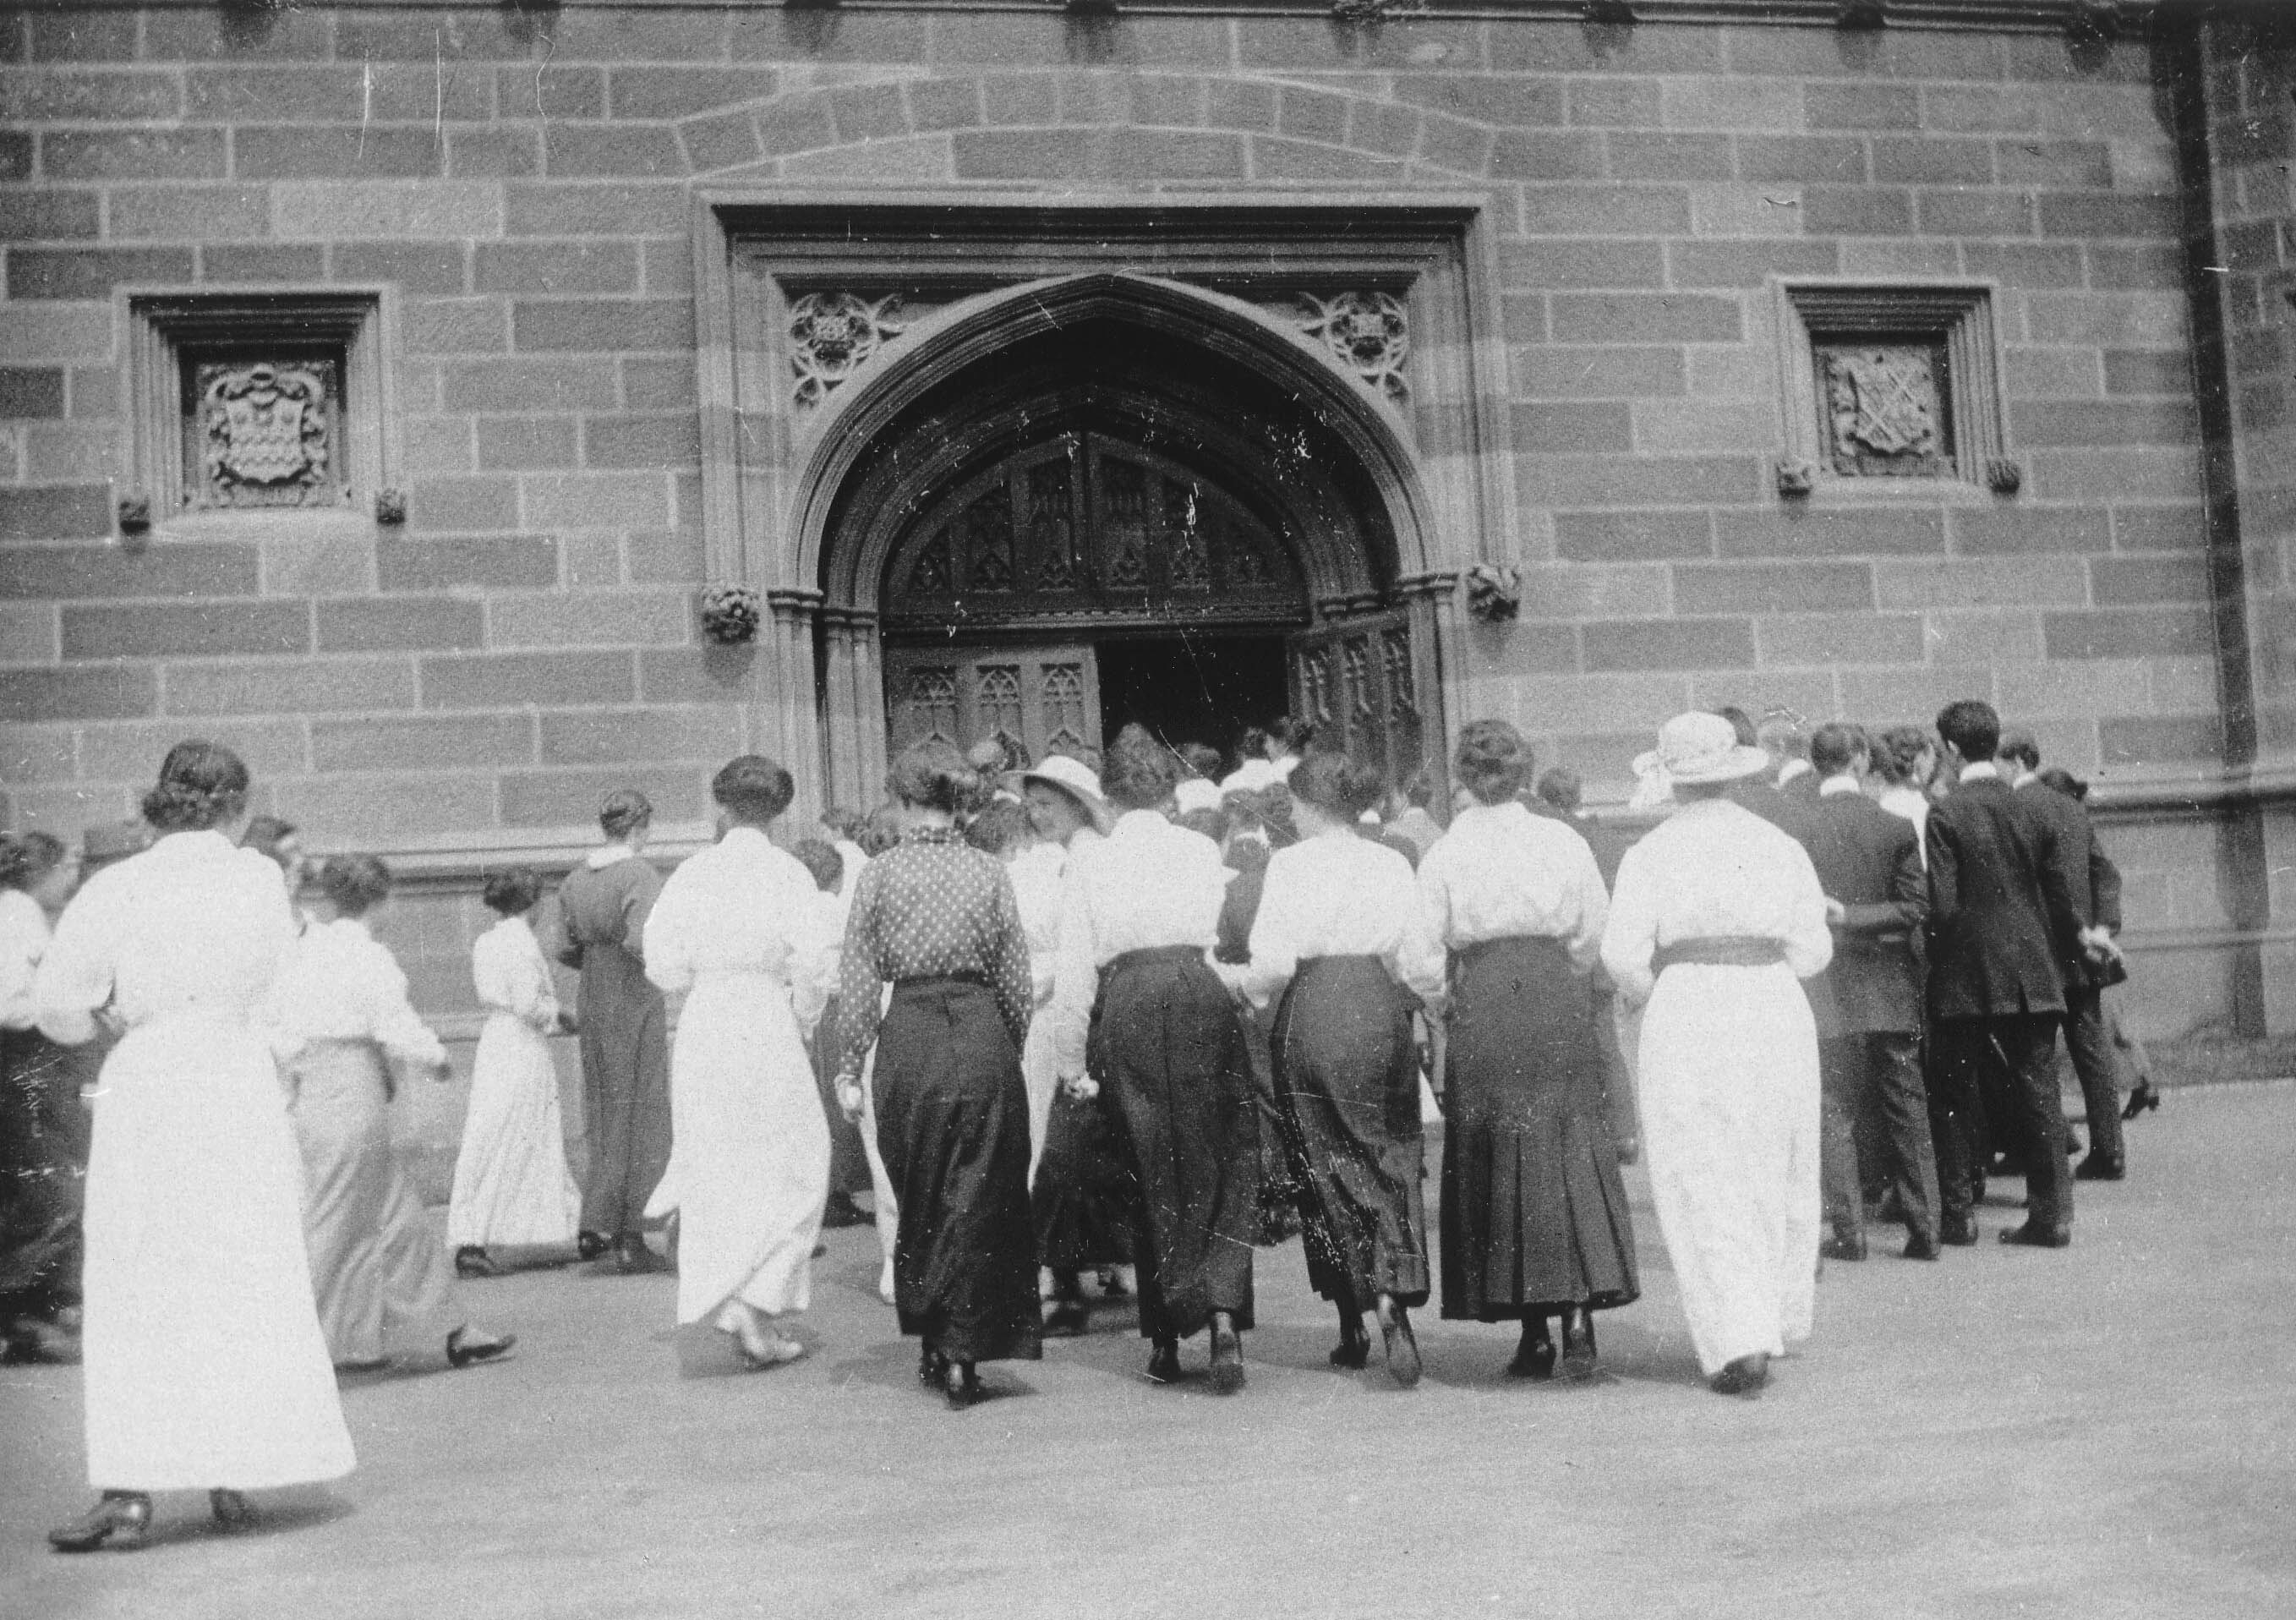 STUDENTS ENTERING GREAT HALL FOR EXAMINATIONS